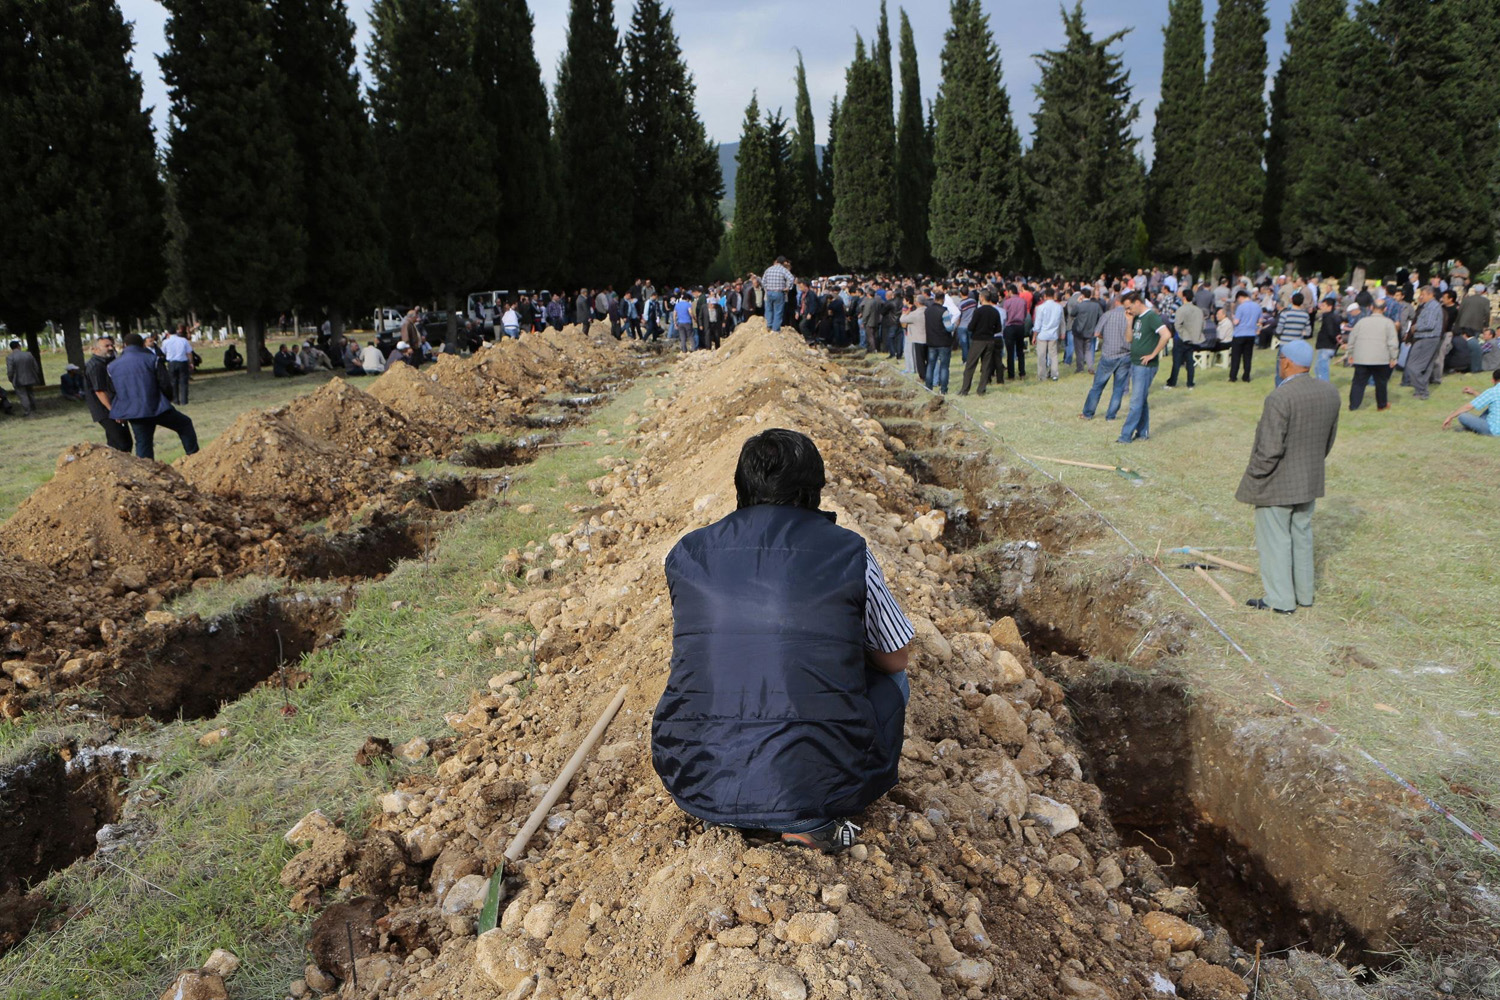 A man sits near graves during the funeral of a miner who died in a fire at a coal mine, in Soma